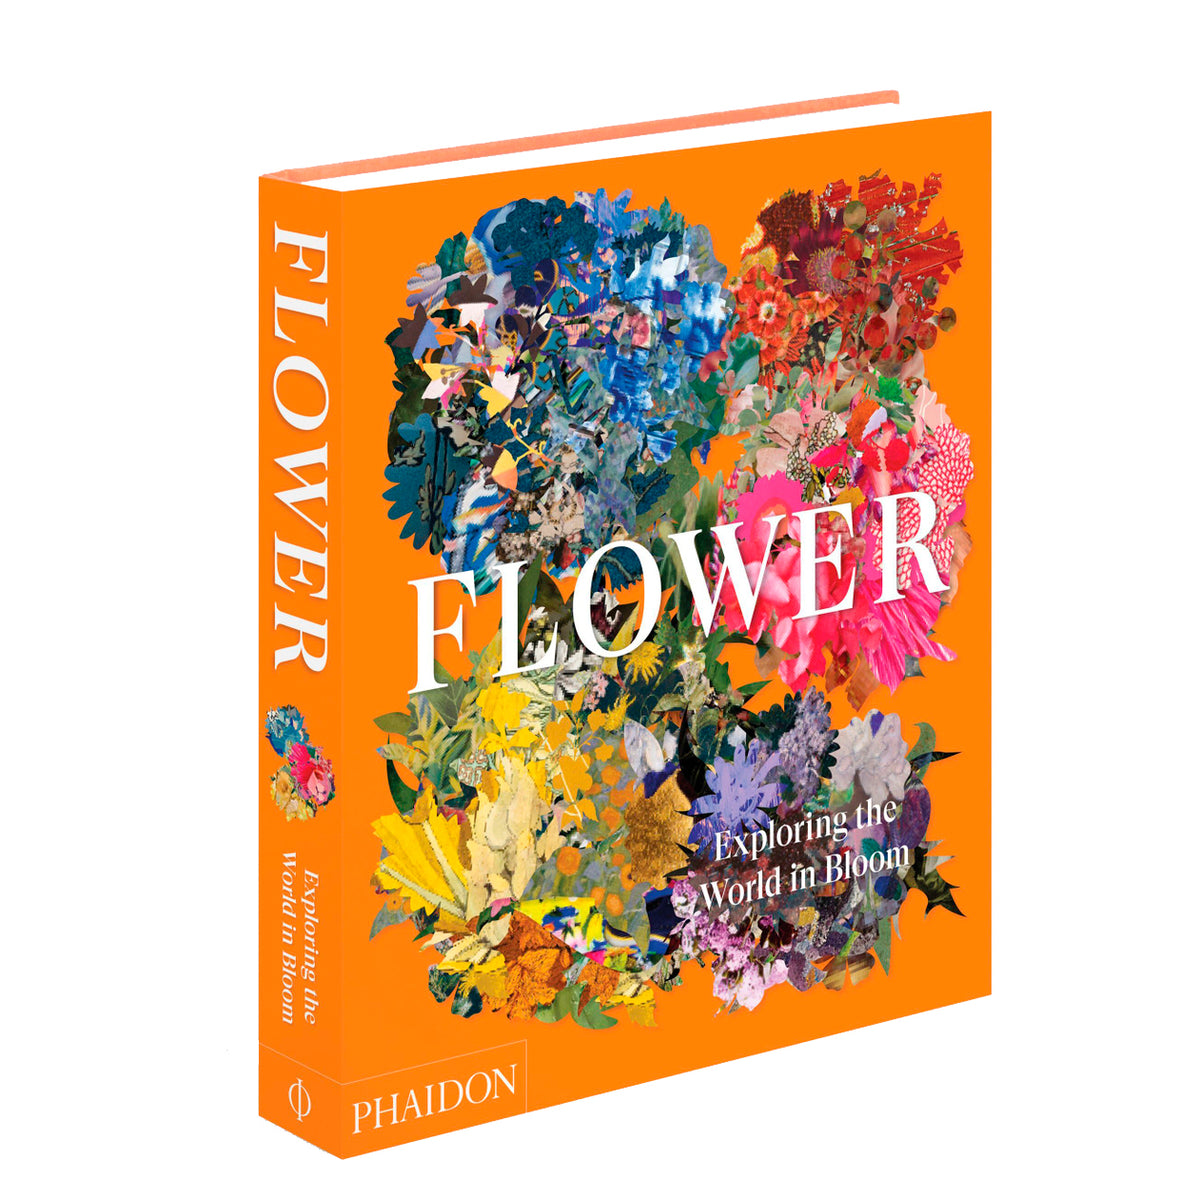 Flower. Exploring the world in Bloom